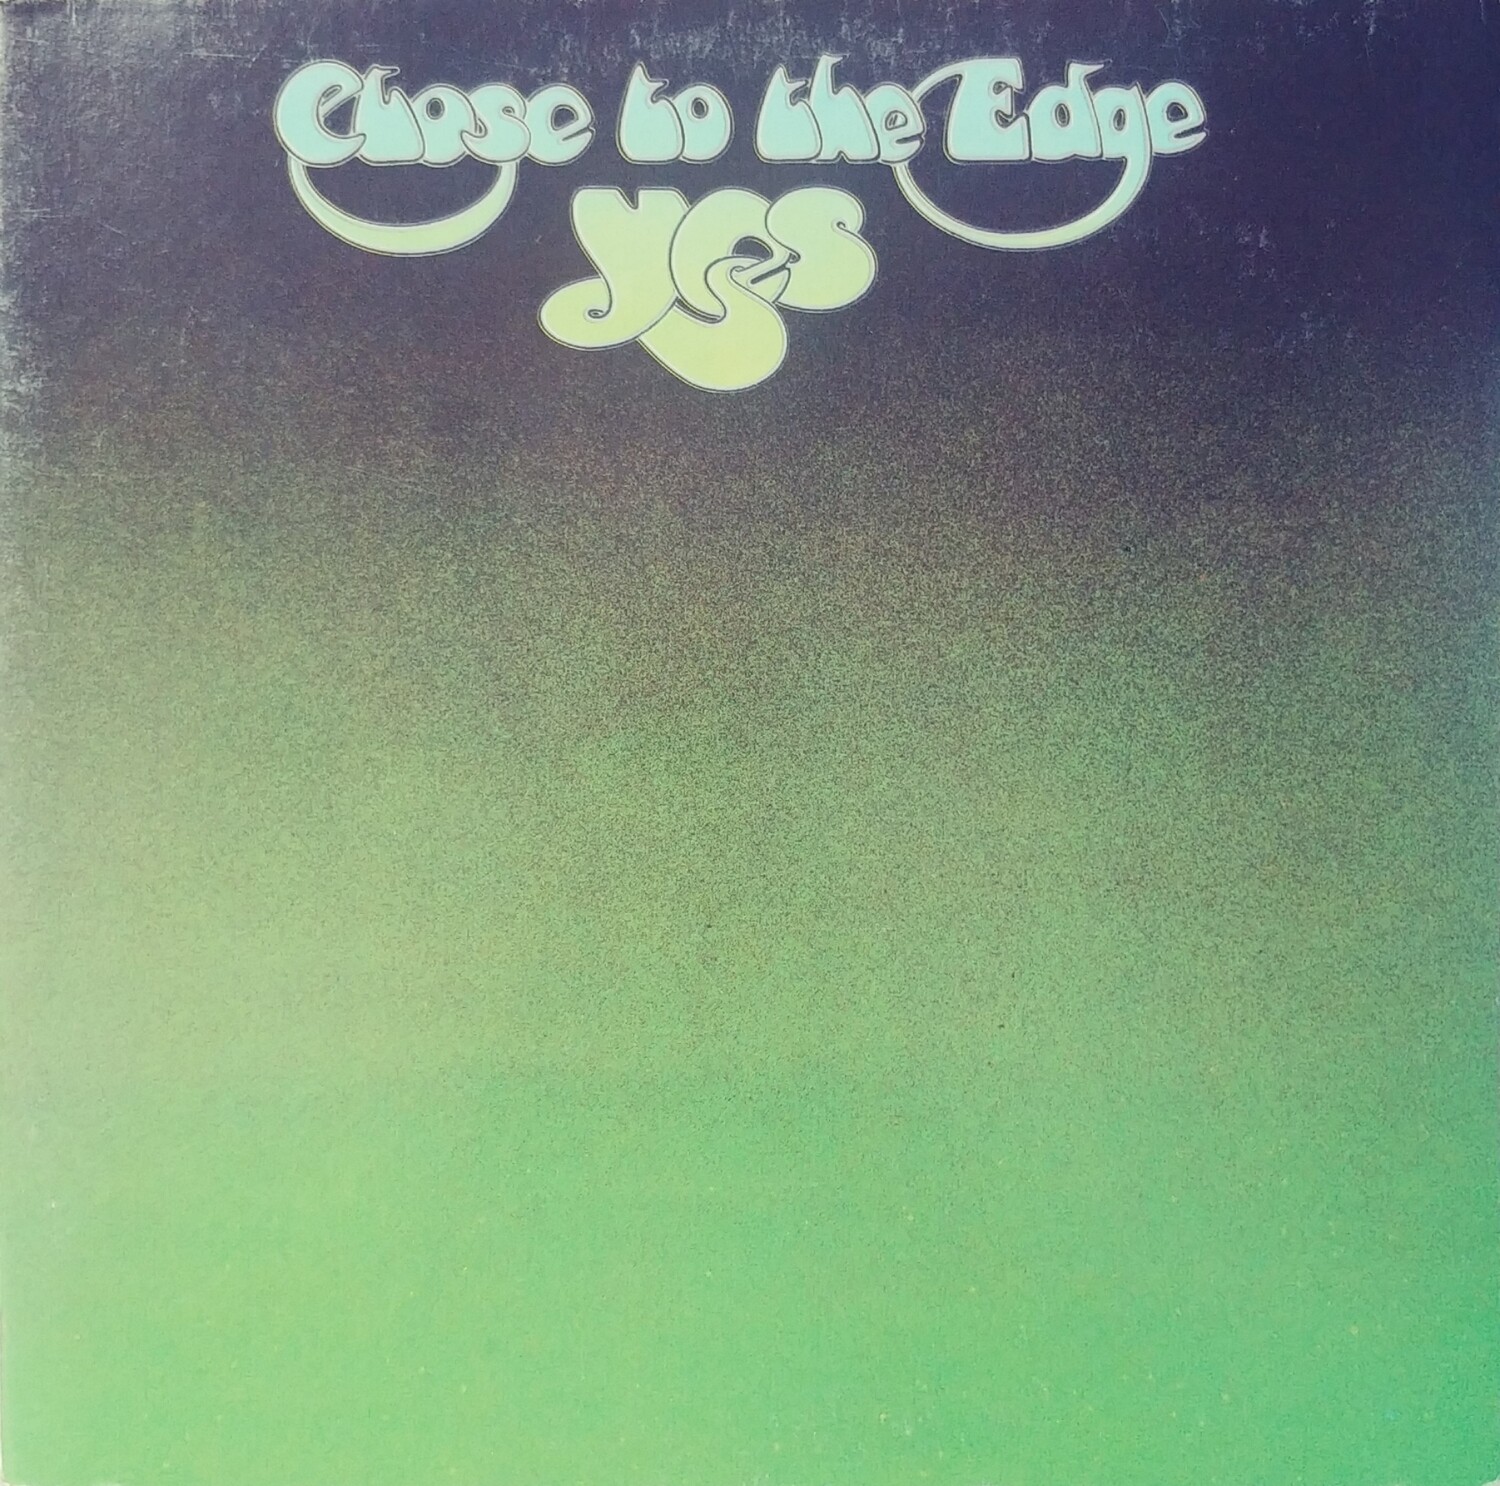 YES - Close to the edge